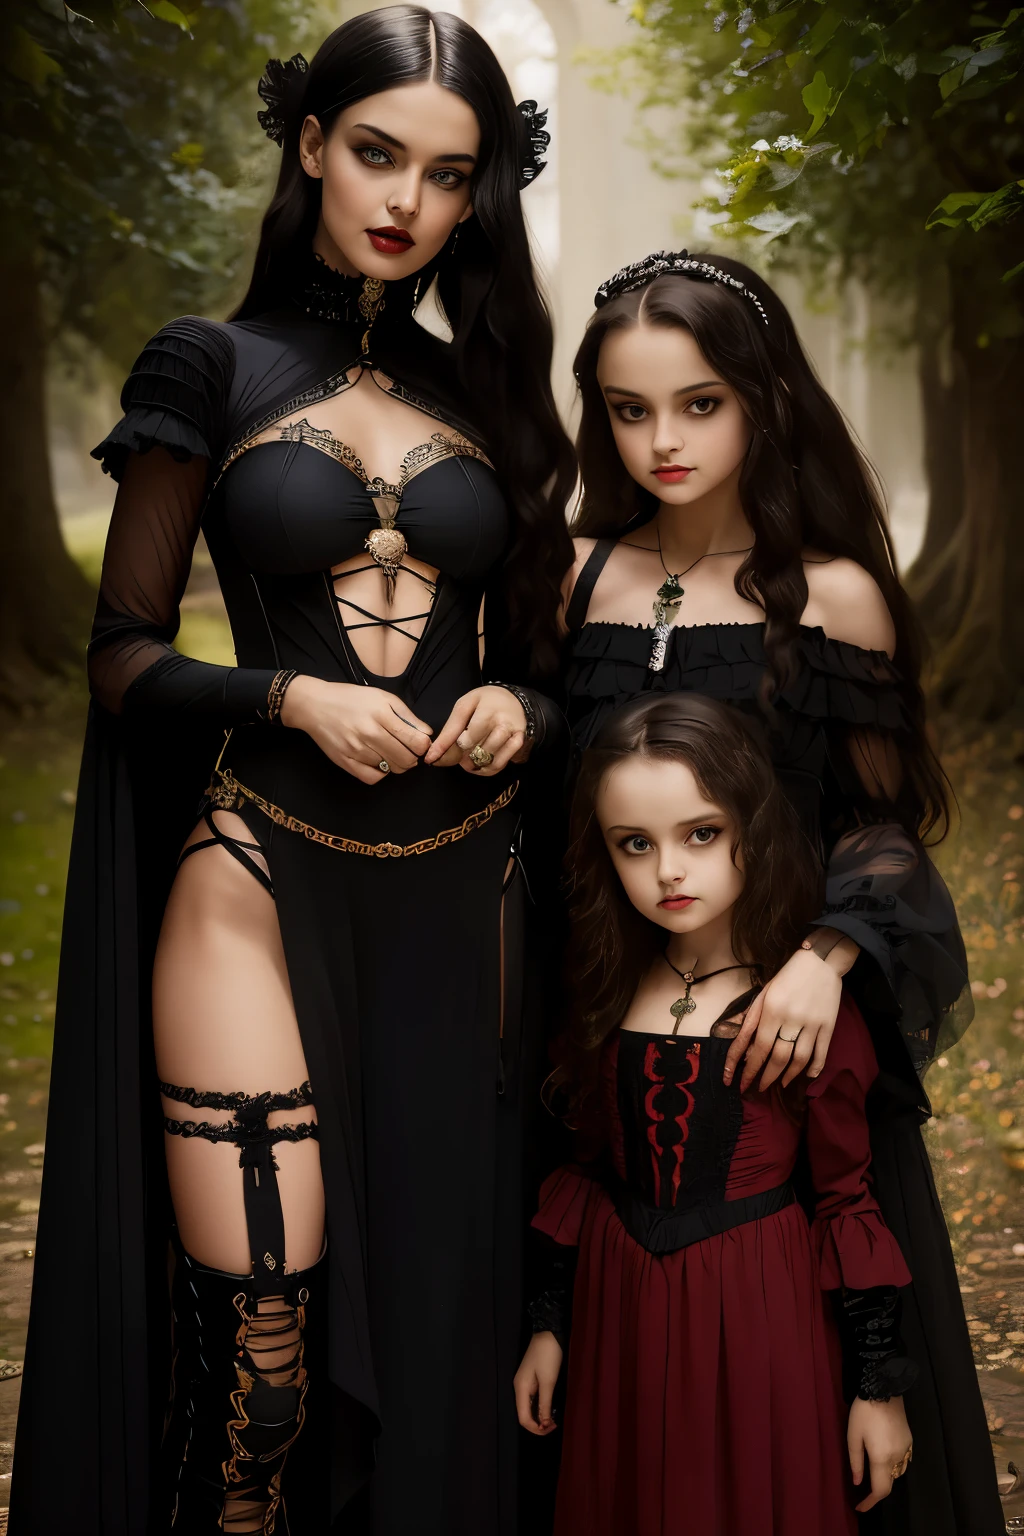 gothic Italian white ethnic Bikini warrior mom and her daughters white ethnic, full figure, perfect posing for a photo, goth family, victorian goth, victorian gothic, artstyle tom bagshaw, victorian gothic lolita fashion, gothic aesthetic, gothic fantasy, earley, gothic influence, neo gothic, gothic bikini, gothic bikini armour, tom bagshaw artstyle, gothic fashion, gothic fantasy art, style of tom bagshaw